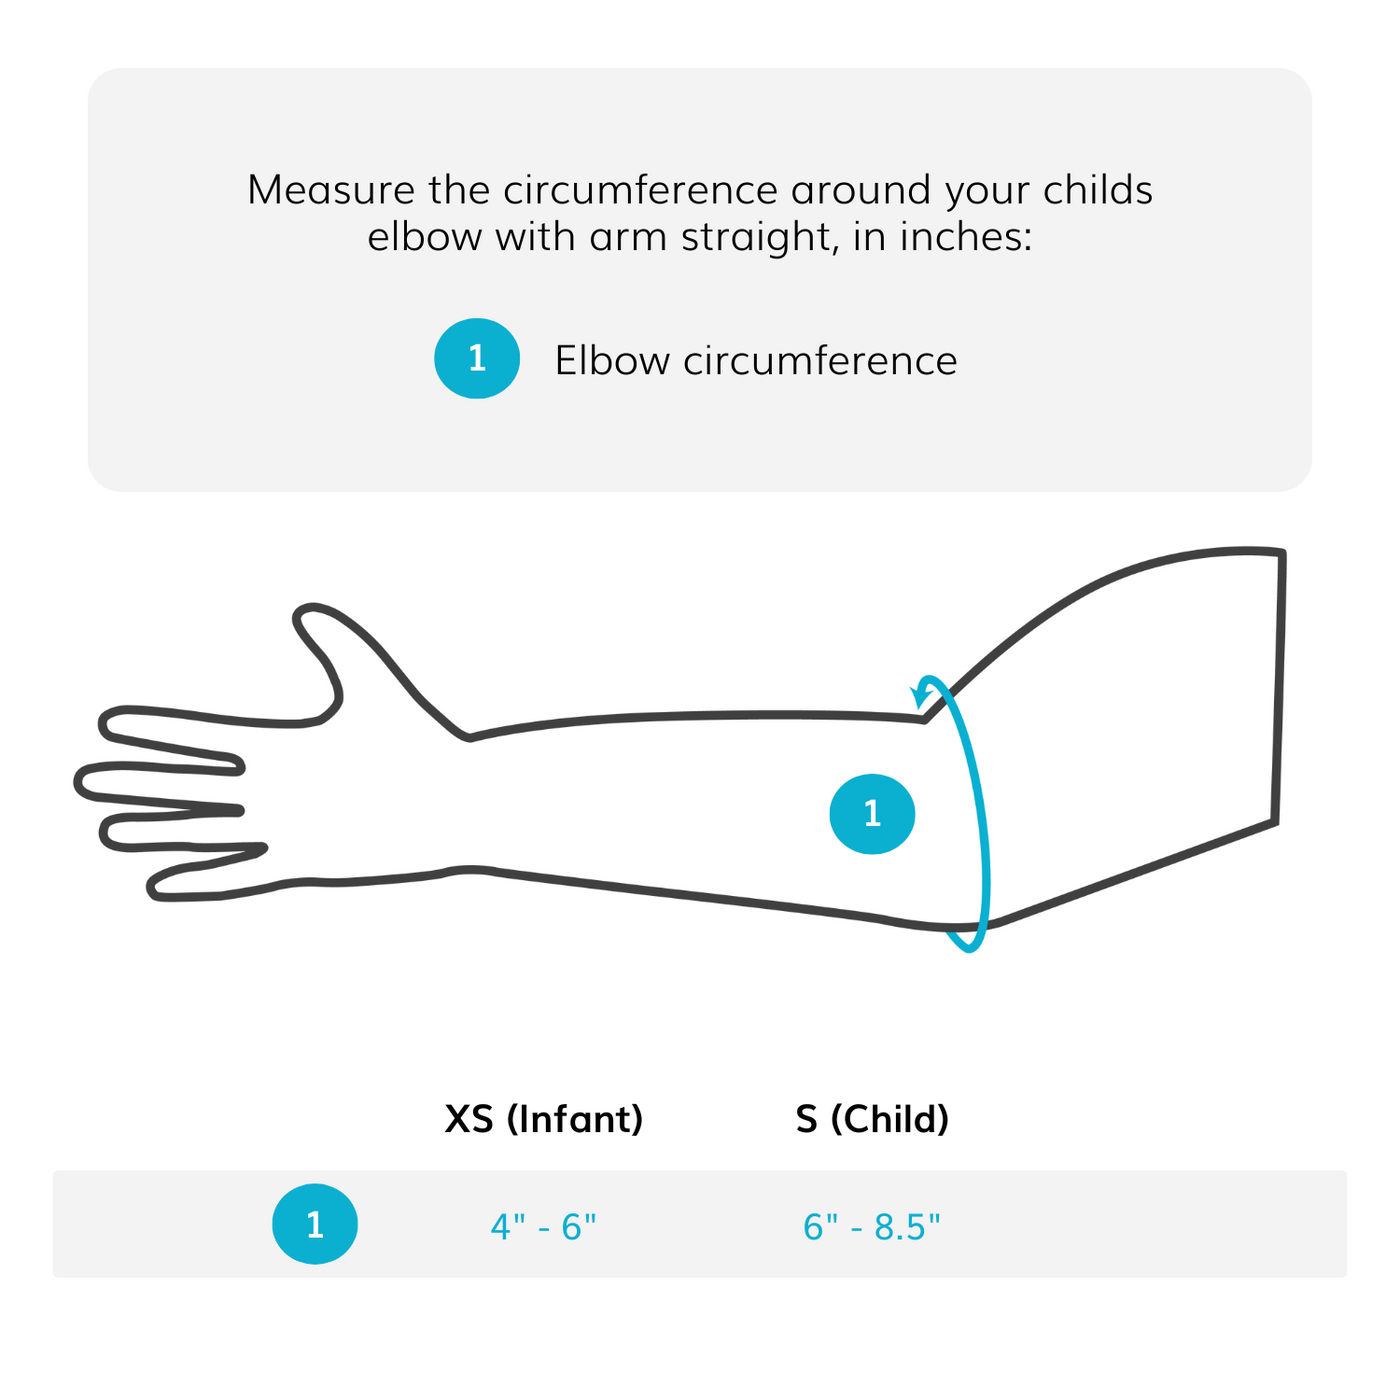 Sizing chart for pediatric elbow stabilizer - measure the circumference around your elbow. XS fits infants (4"-6") S fits toddlers and younger children (6"-8.5")